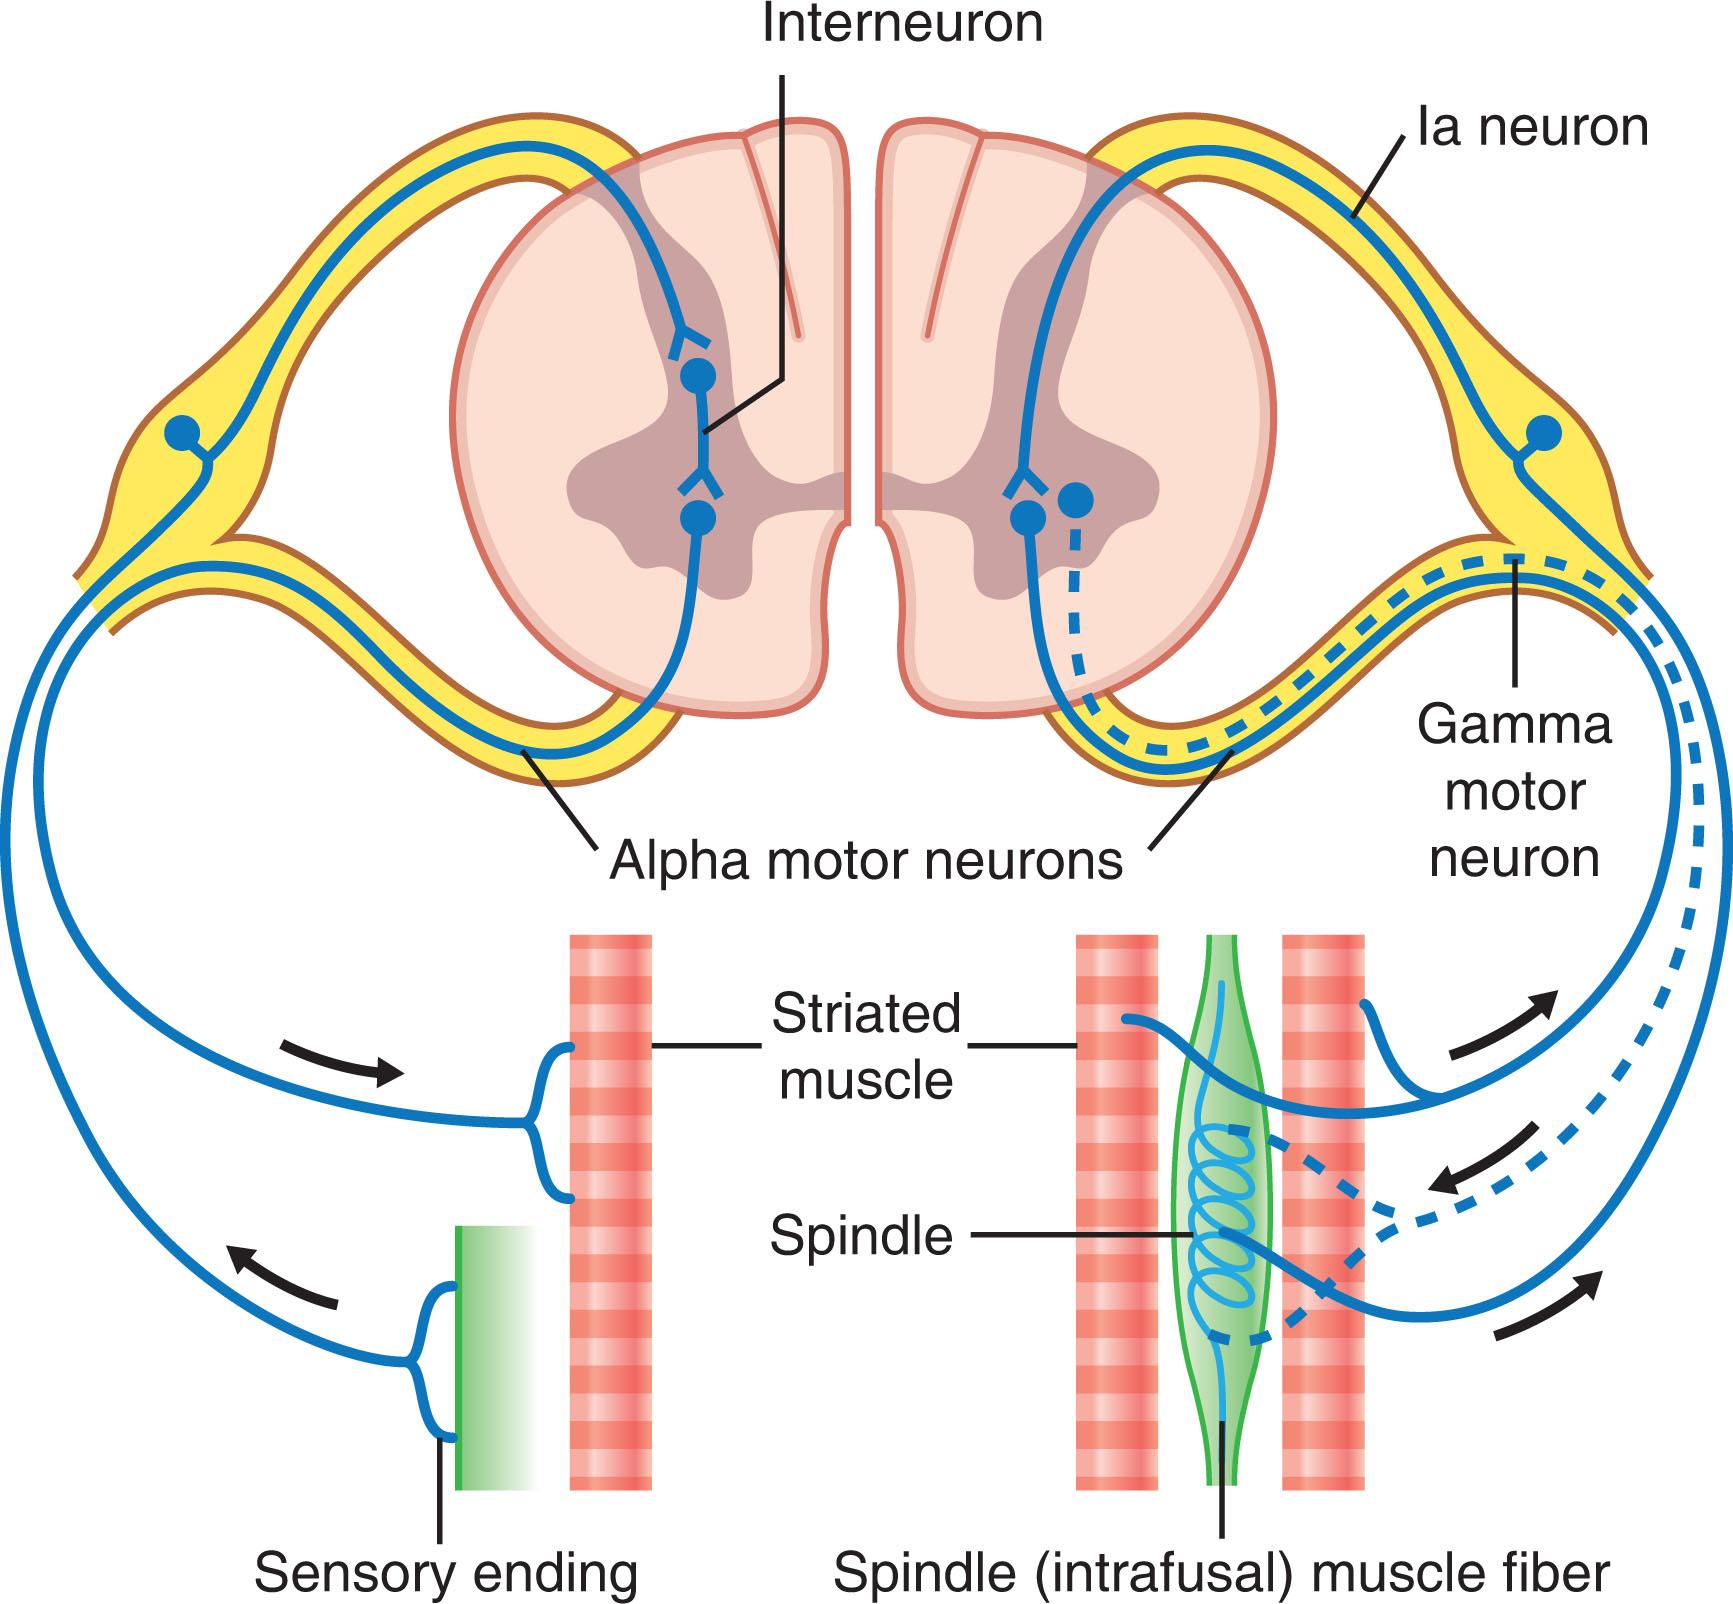 Figure 41.1, Transverse section of the spinal cord with schematic illustration of the neurons involved in the stretch reflex (right side) showing innervation of striated muscle fibers by alpha motor neurons, and of fibers within muscle spindle by gamma motor neurons. Schematic illustration of the role of the interneuron in the connection afferent and efferent neurons, as well as between themselves (left side).